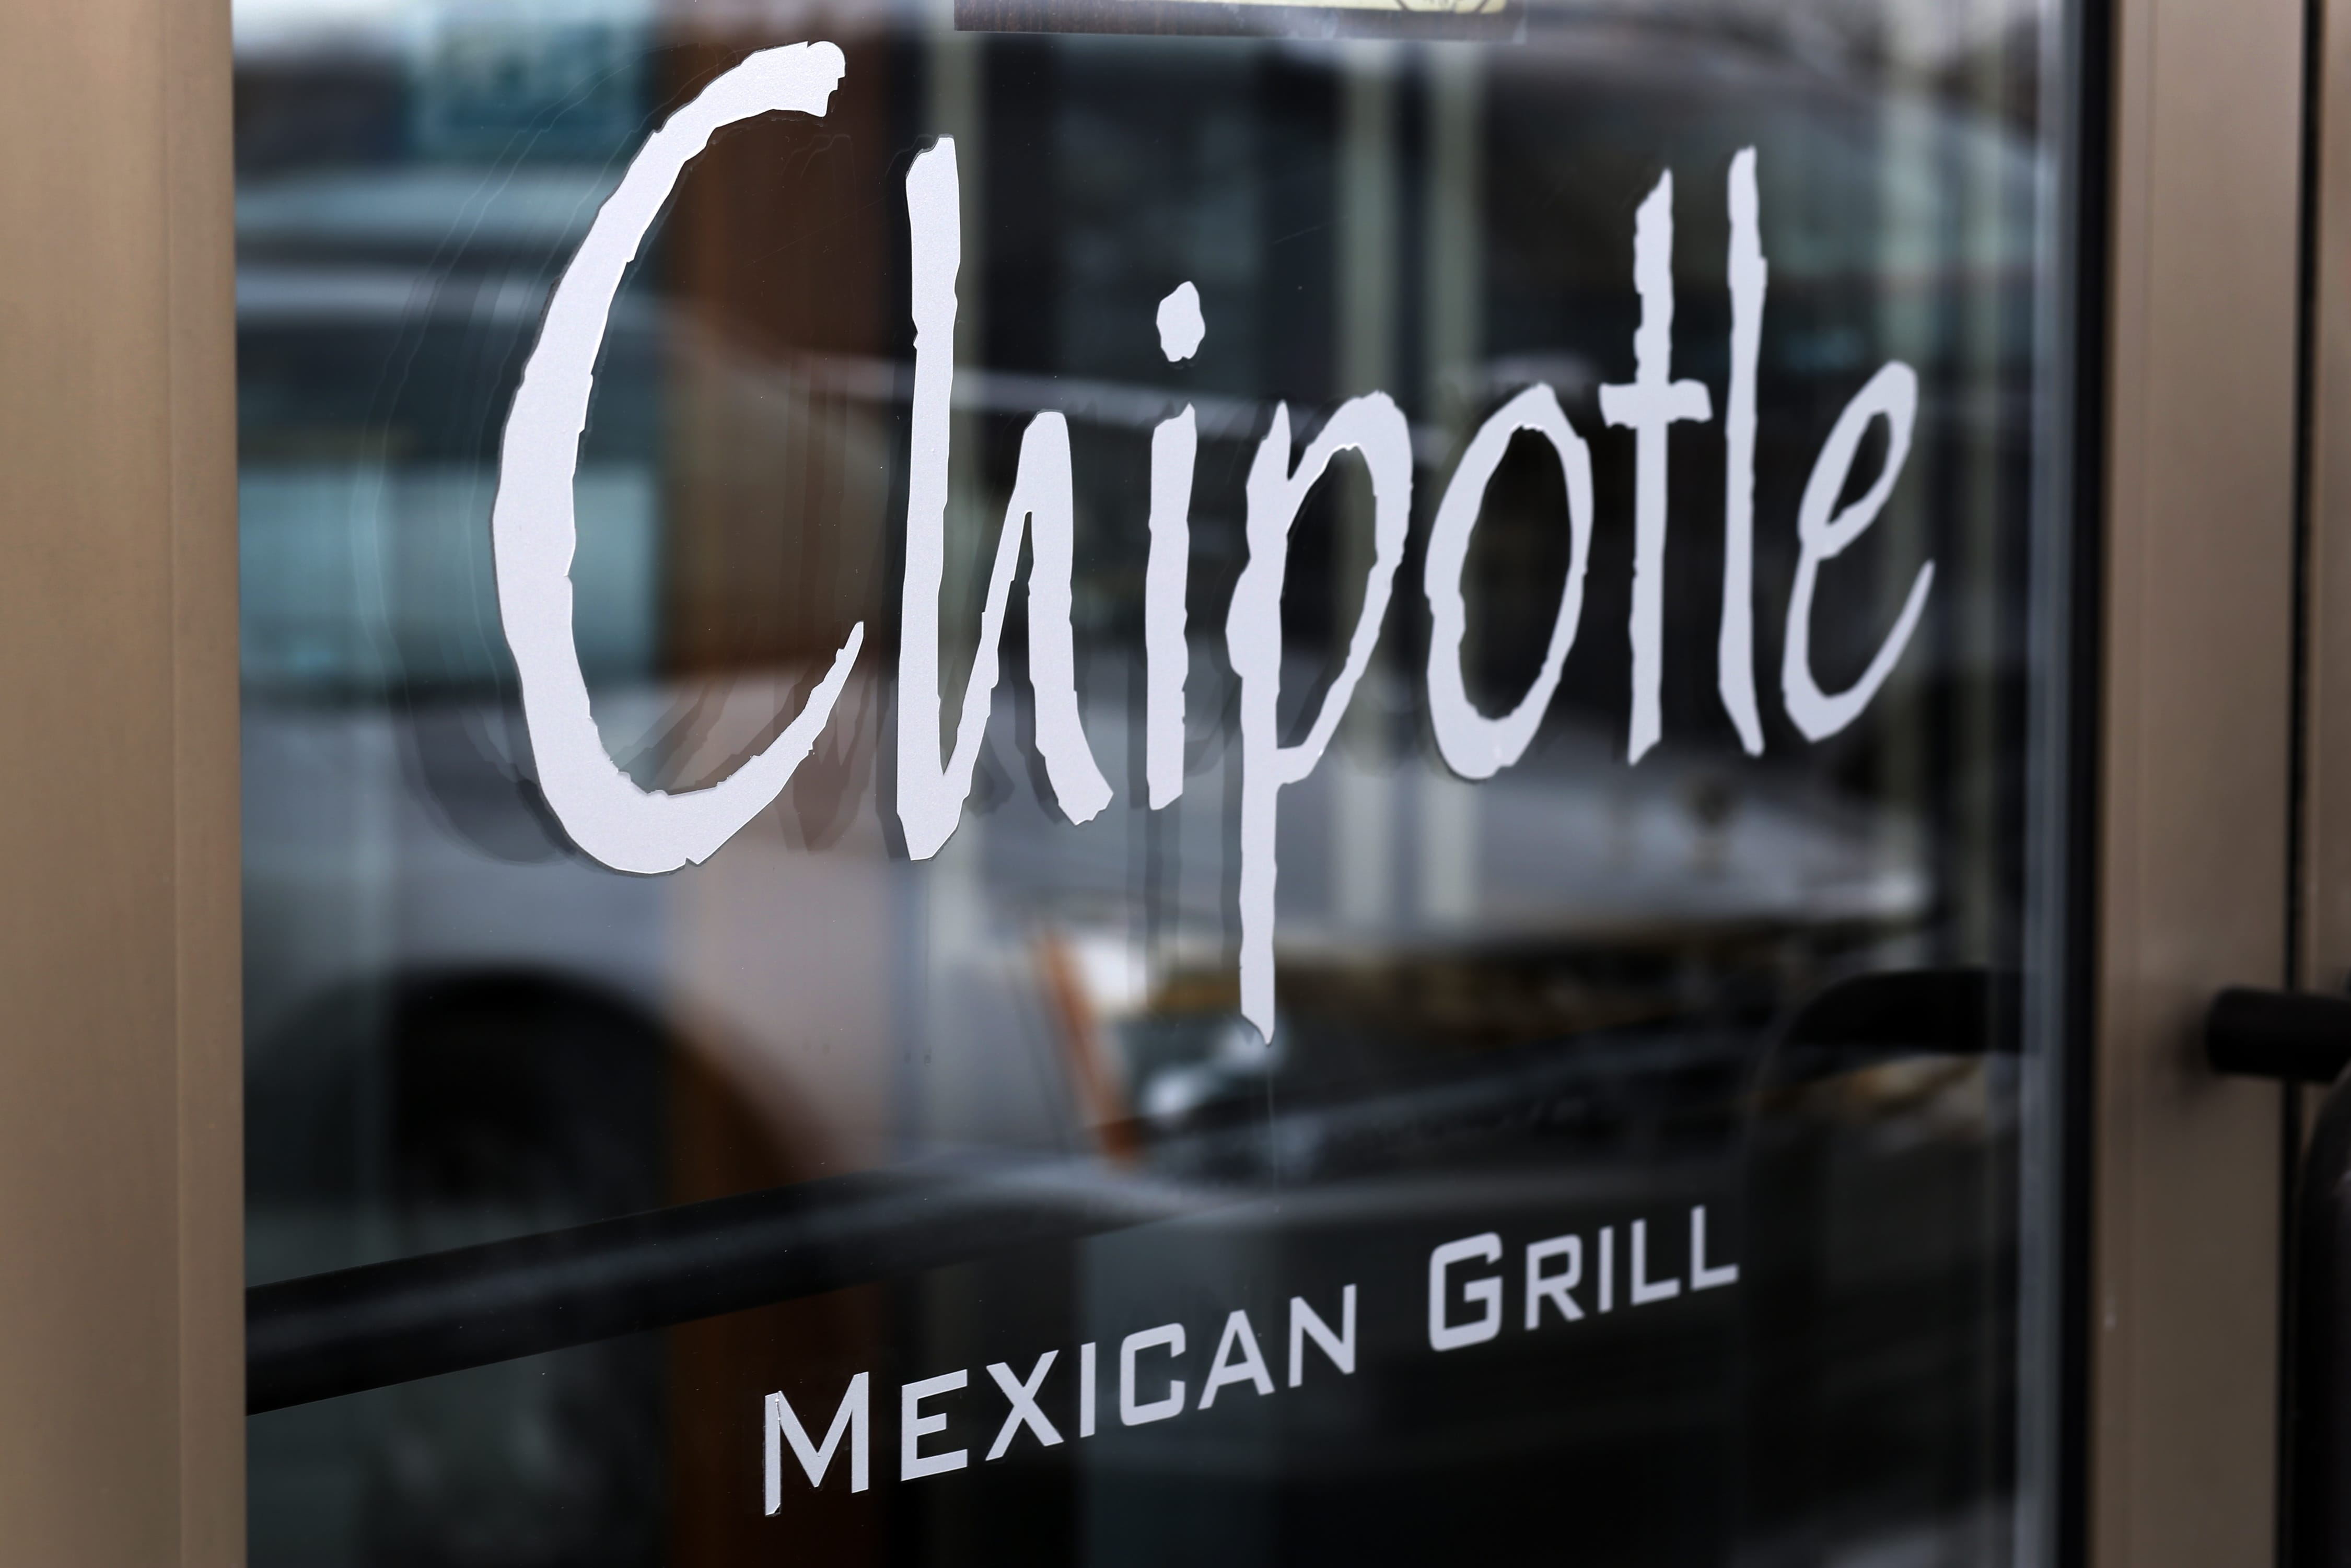 Chioptle Chief Financial Officer Jack Hartung says Chipotle will widen the price gap between steak and chicken on the menu.